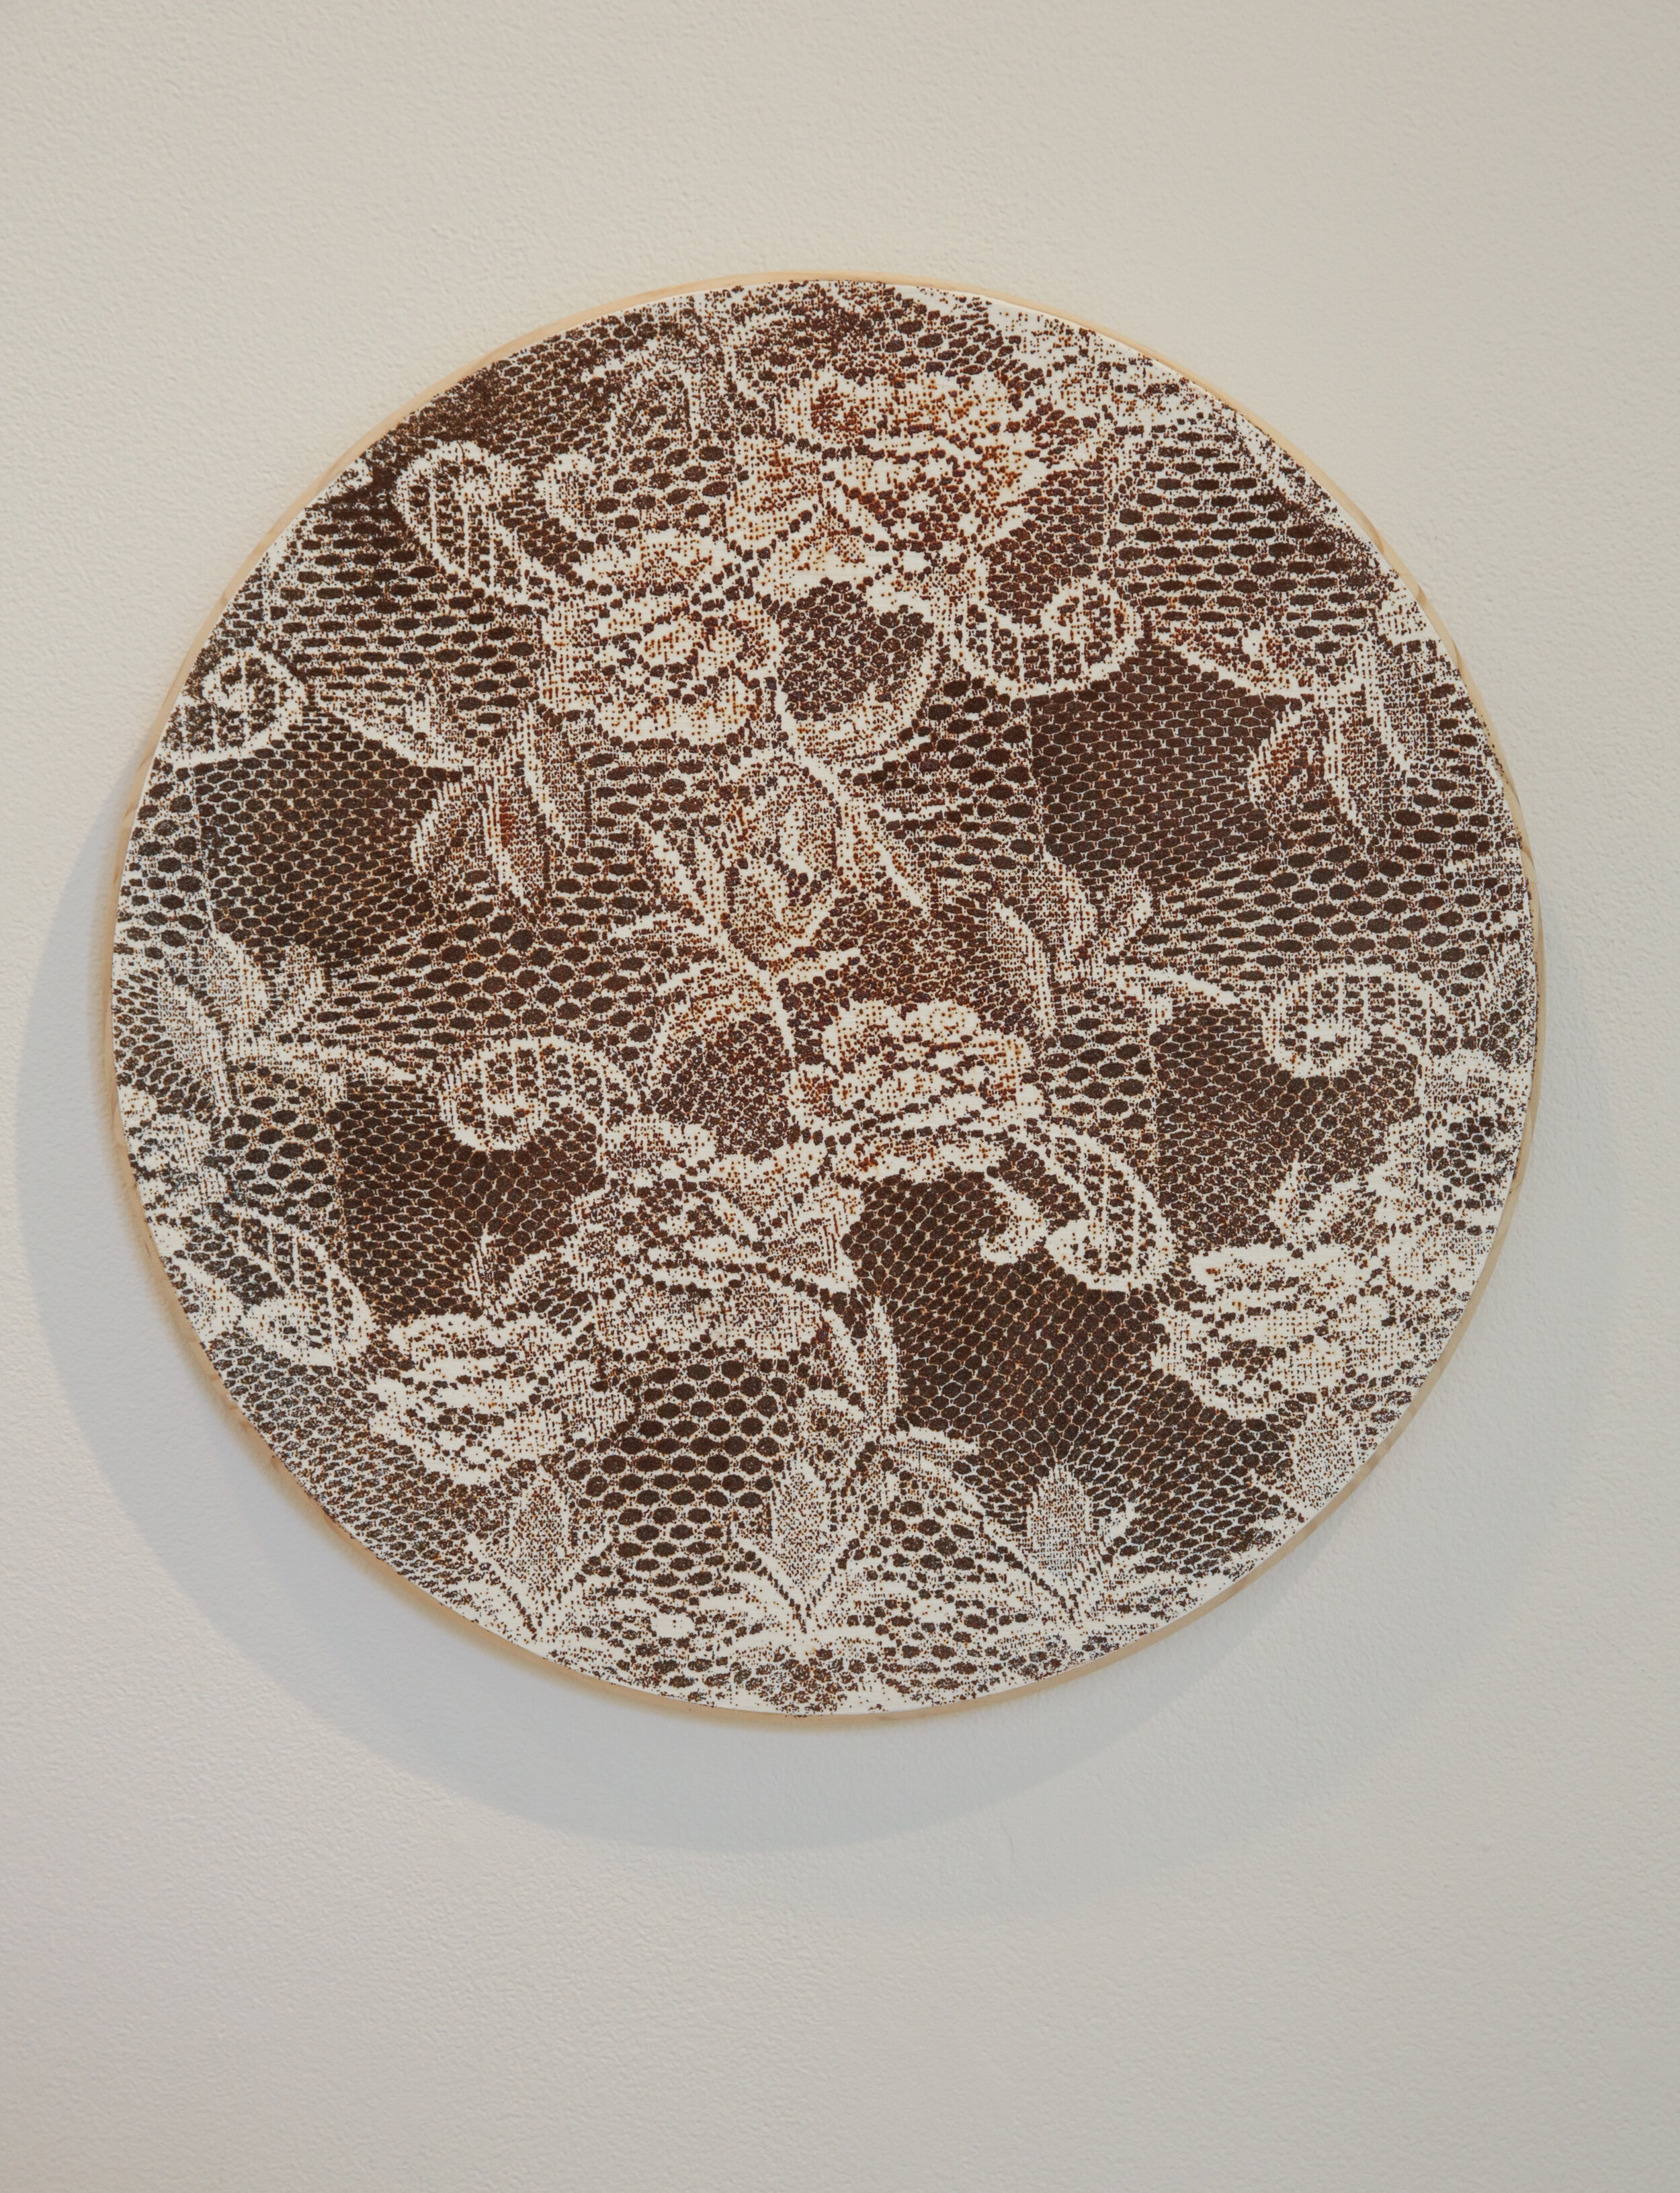   Untitled , 2019 Iron shavings on wood, 26x26x1 inches 